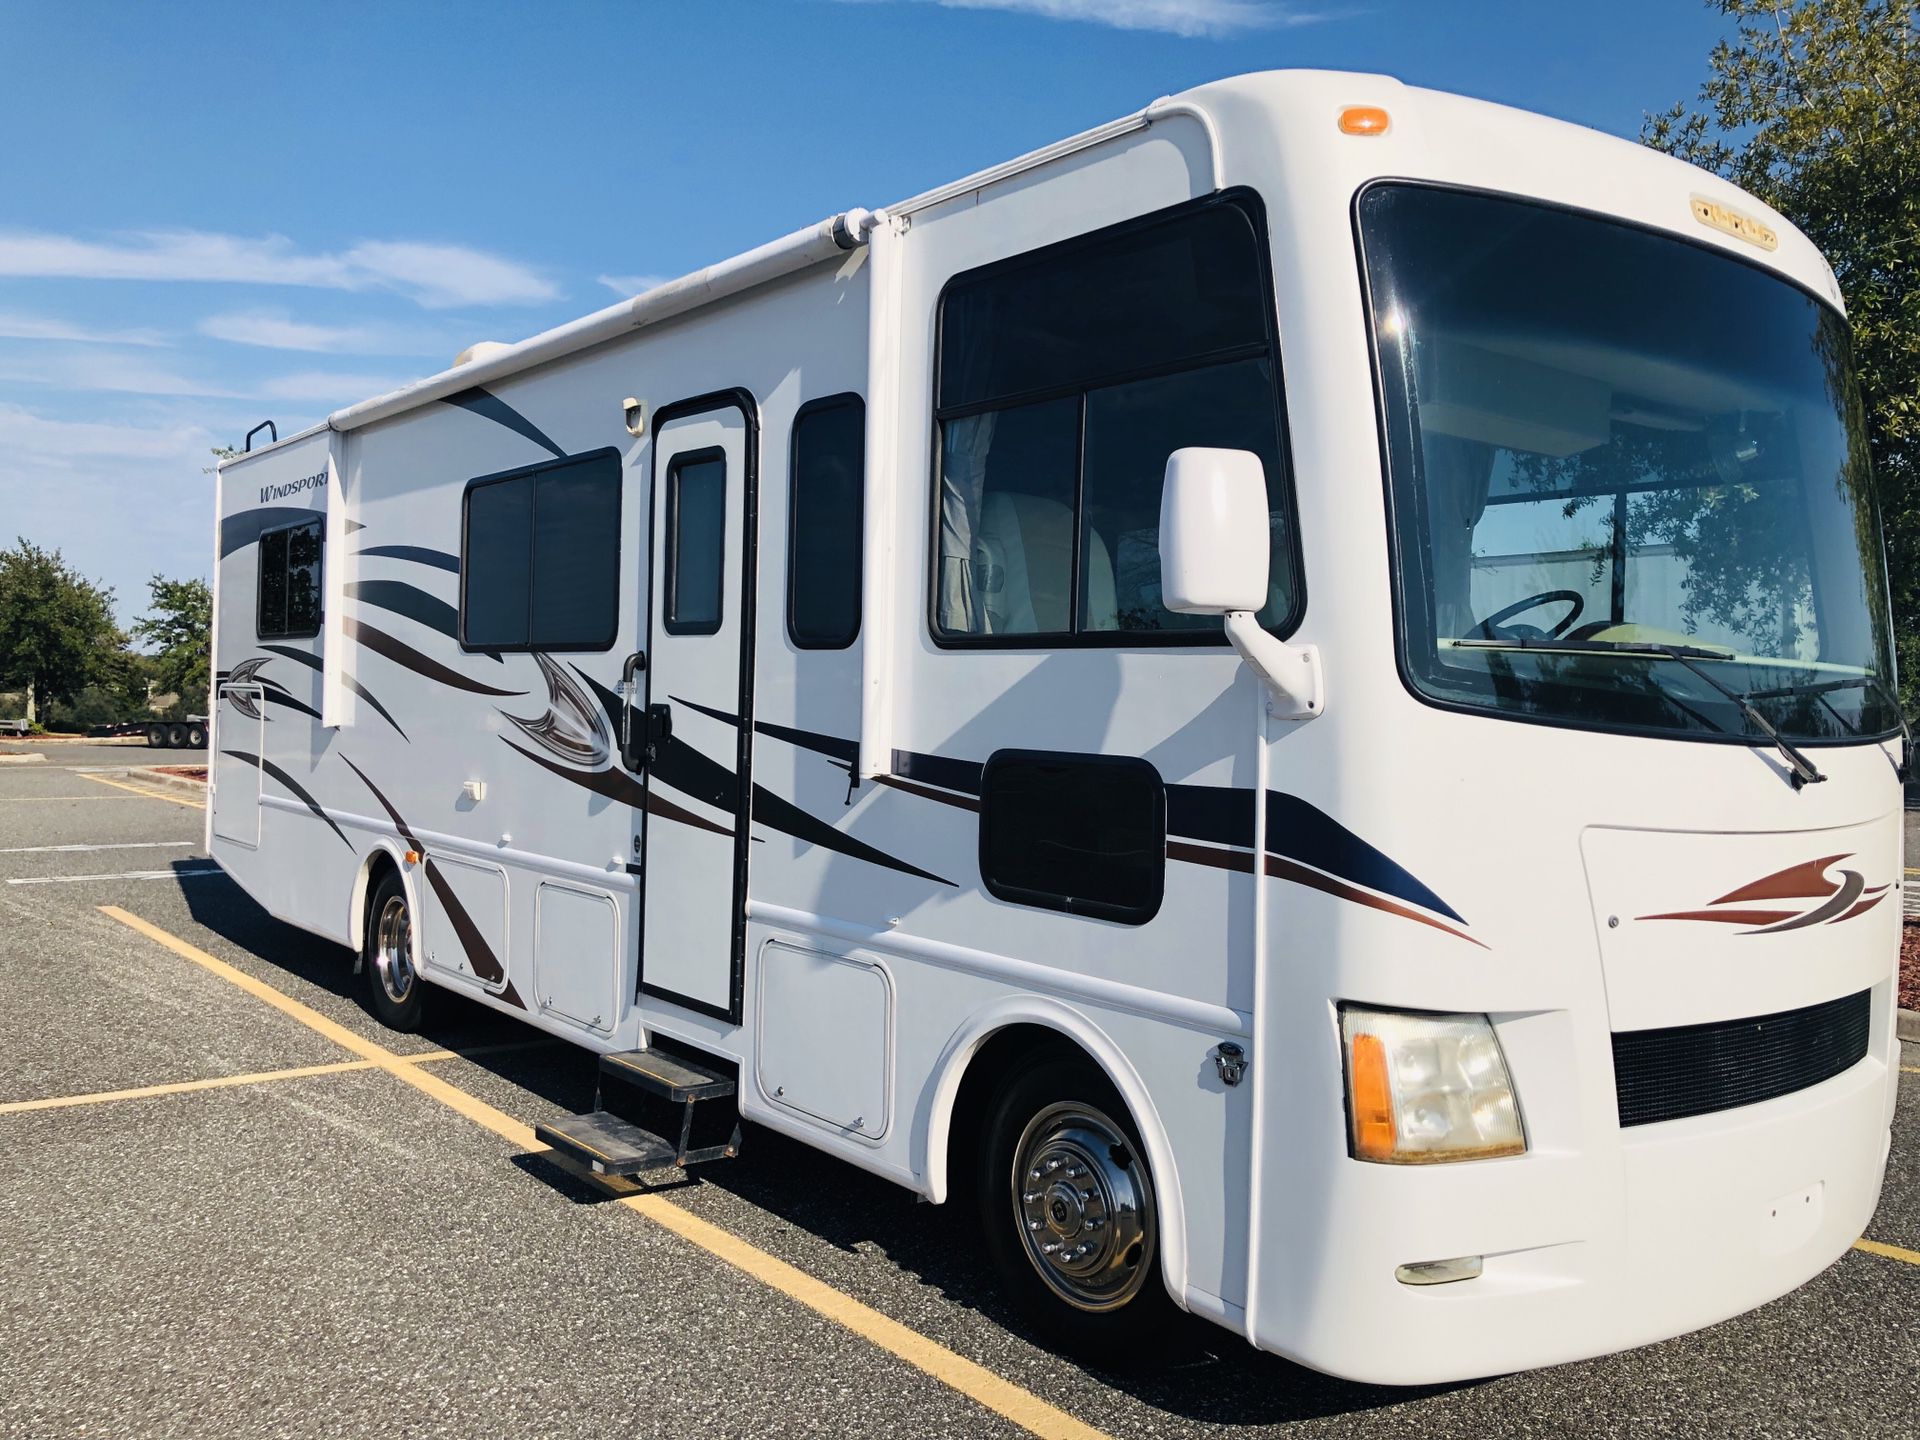 2013 windsport Class A motorhome 30ft like new extreme clean must see original owner always garage kept